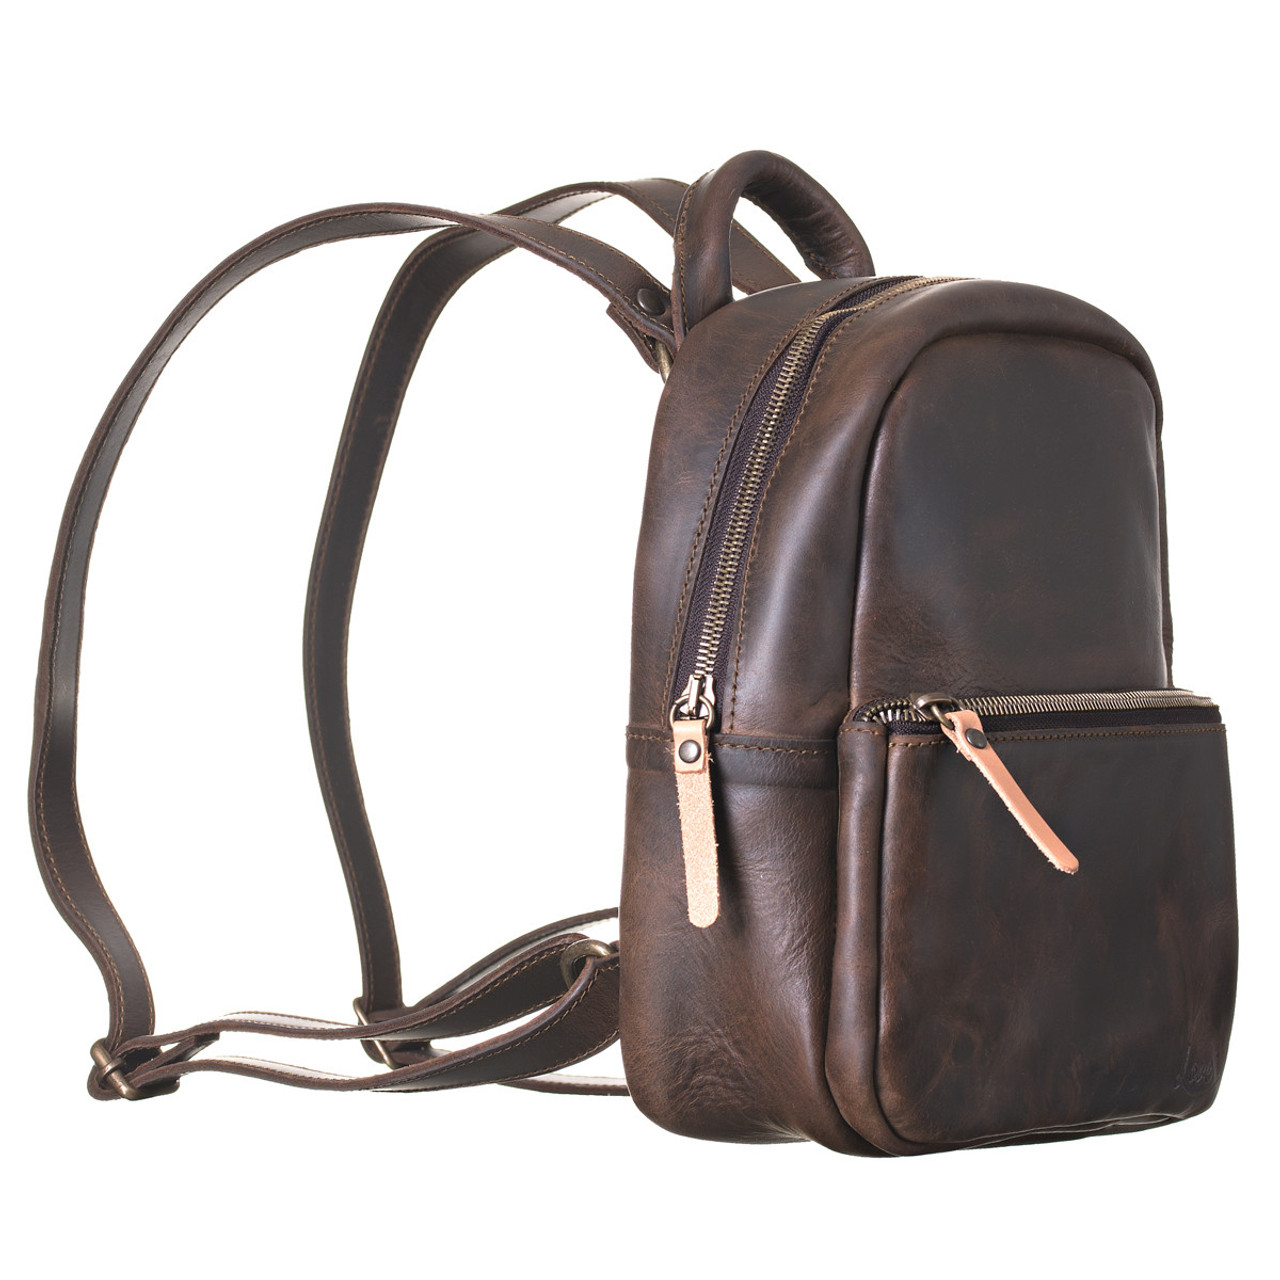 KISH Female Black Ladies Leather Backpack Bag, Number Of Compartments: 4,  Bag Capacity: 10 L at Rs 425 in Mumbai